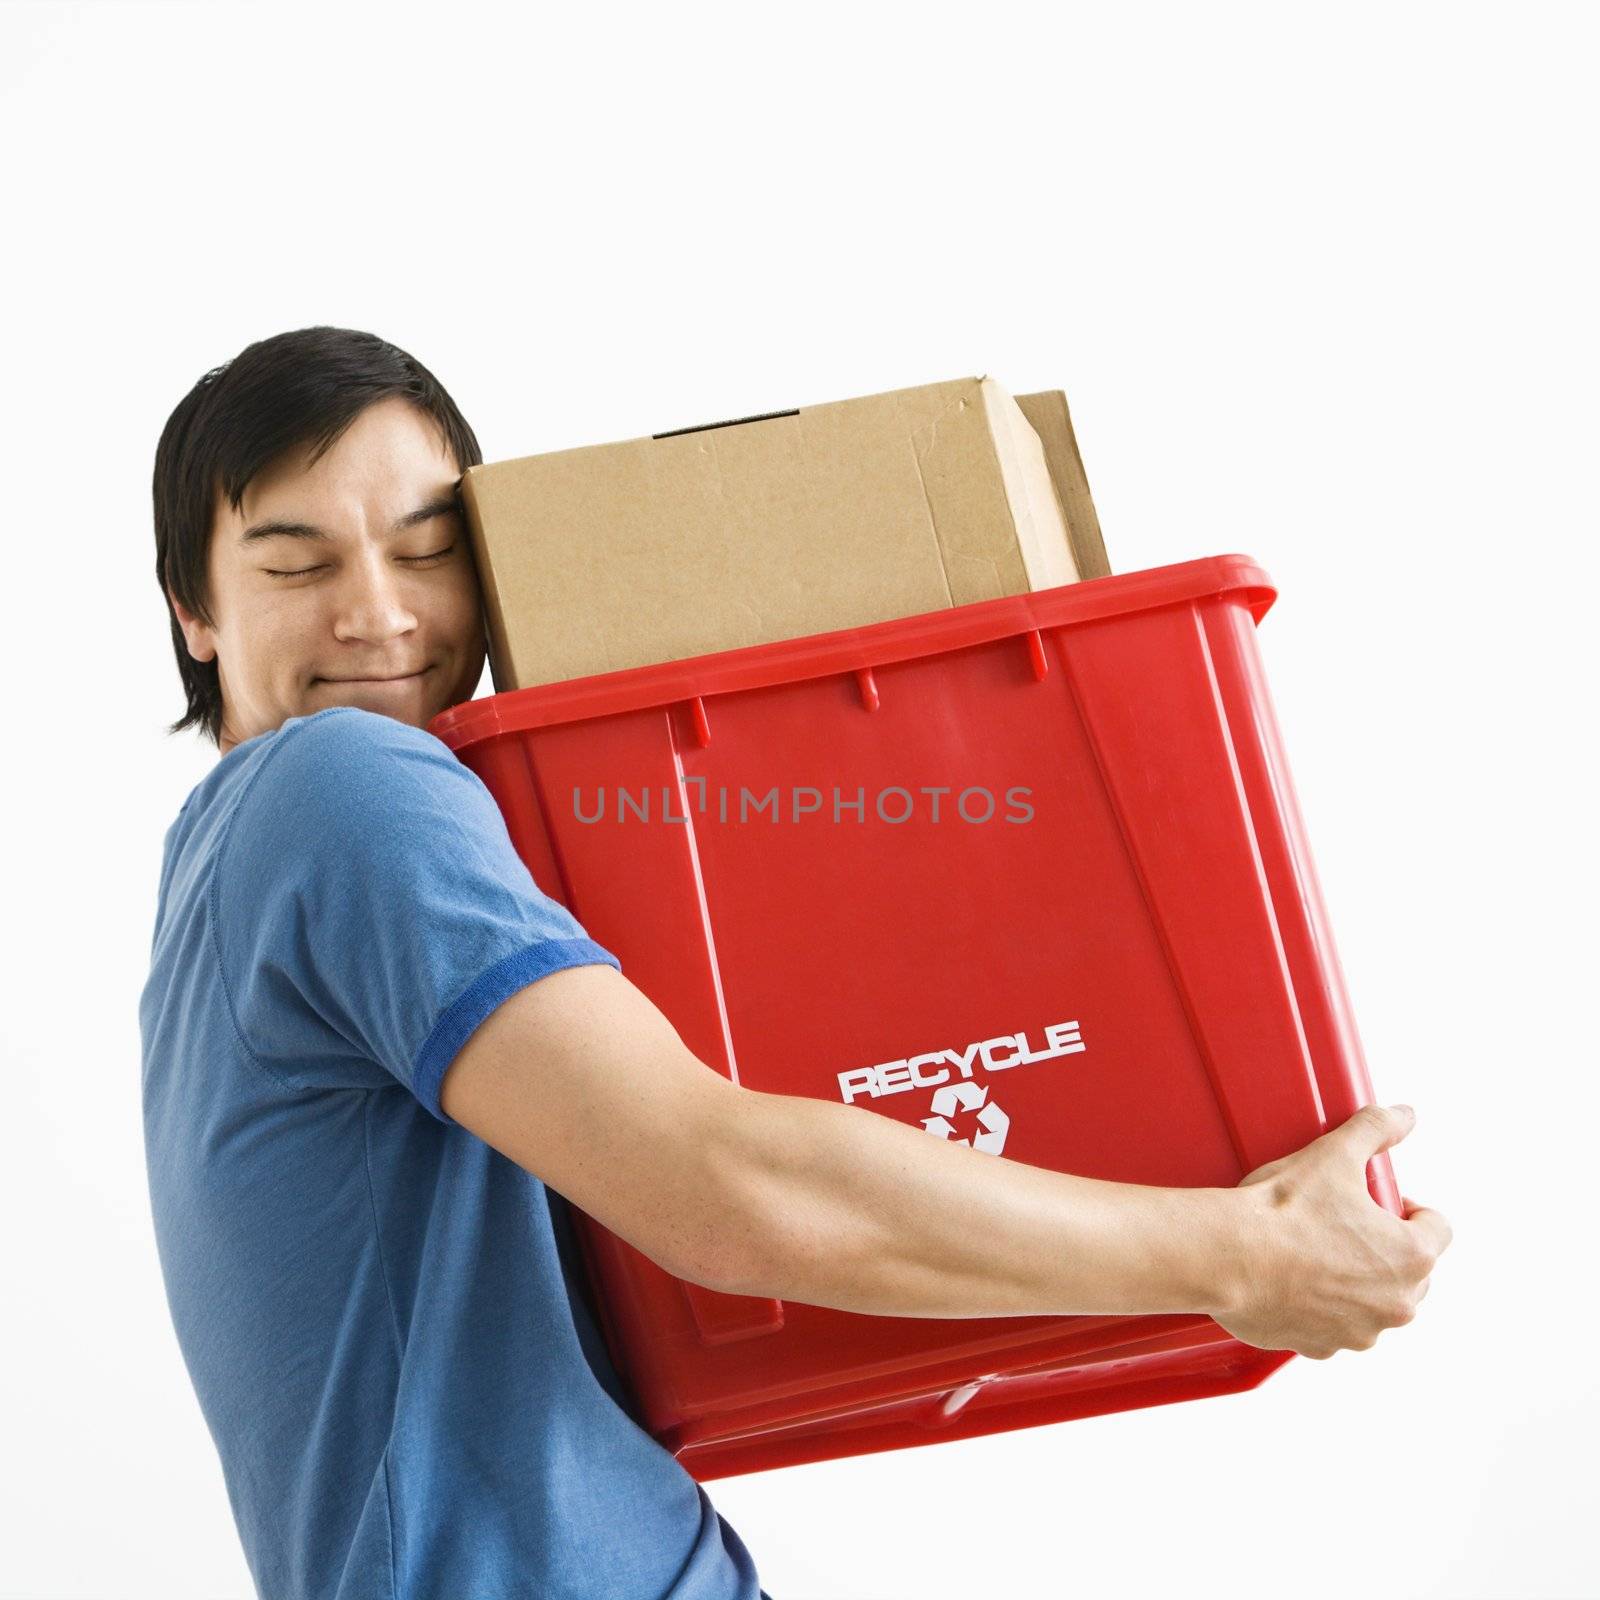 Portrait of smiling Asian young man holding recycling bin.